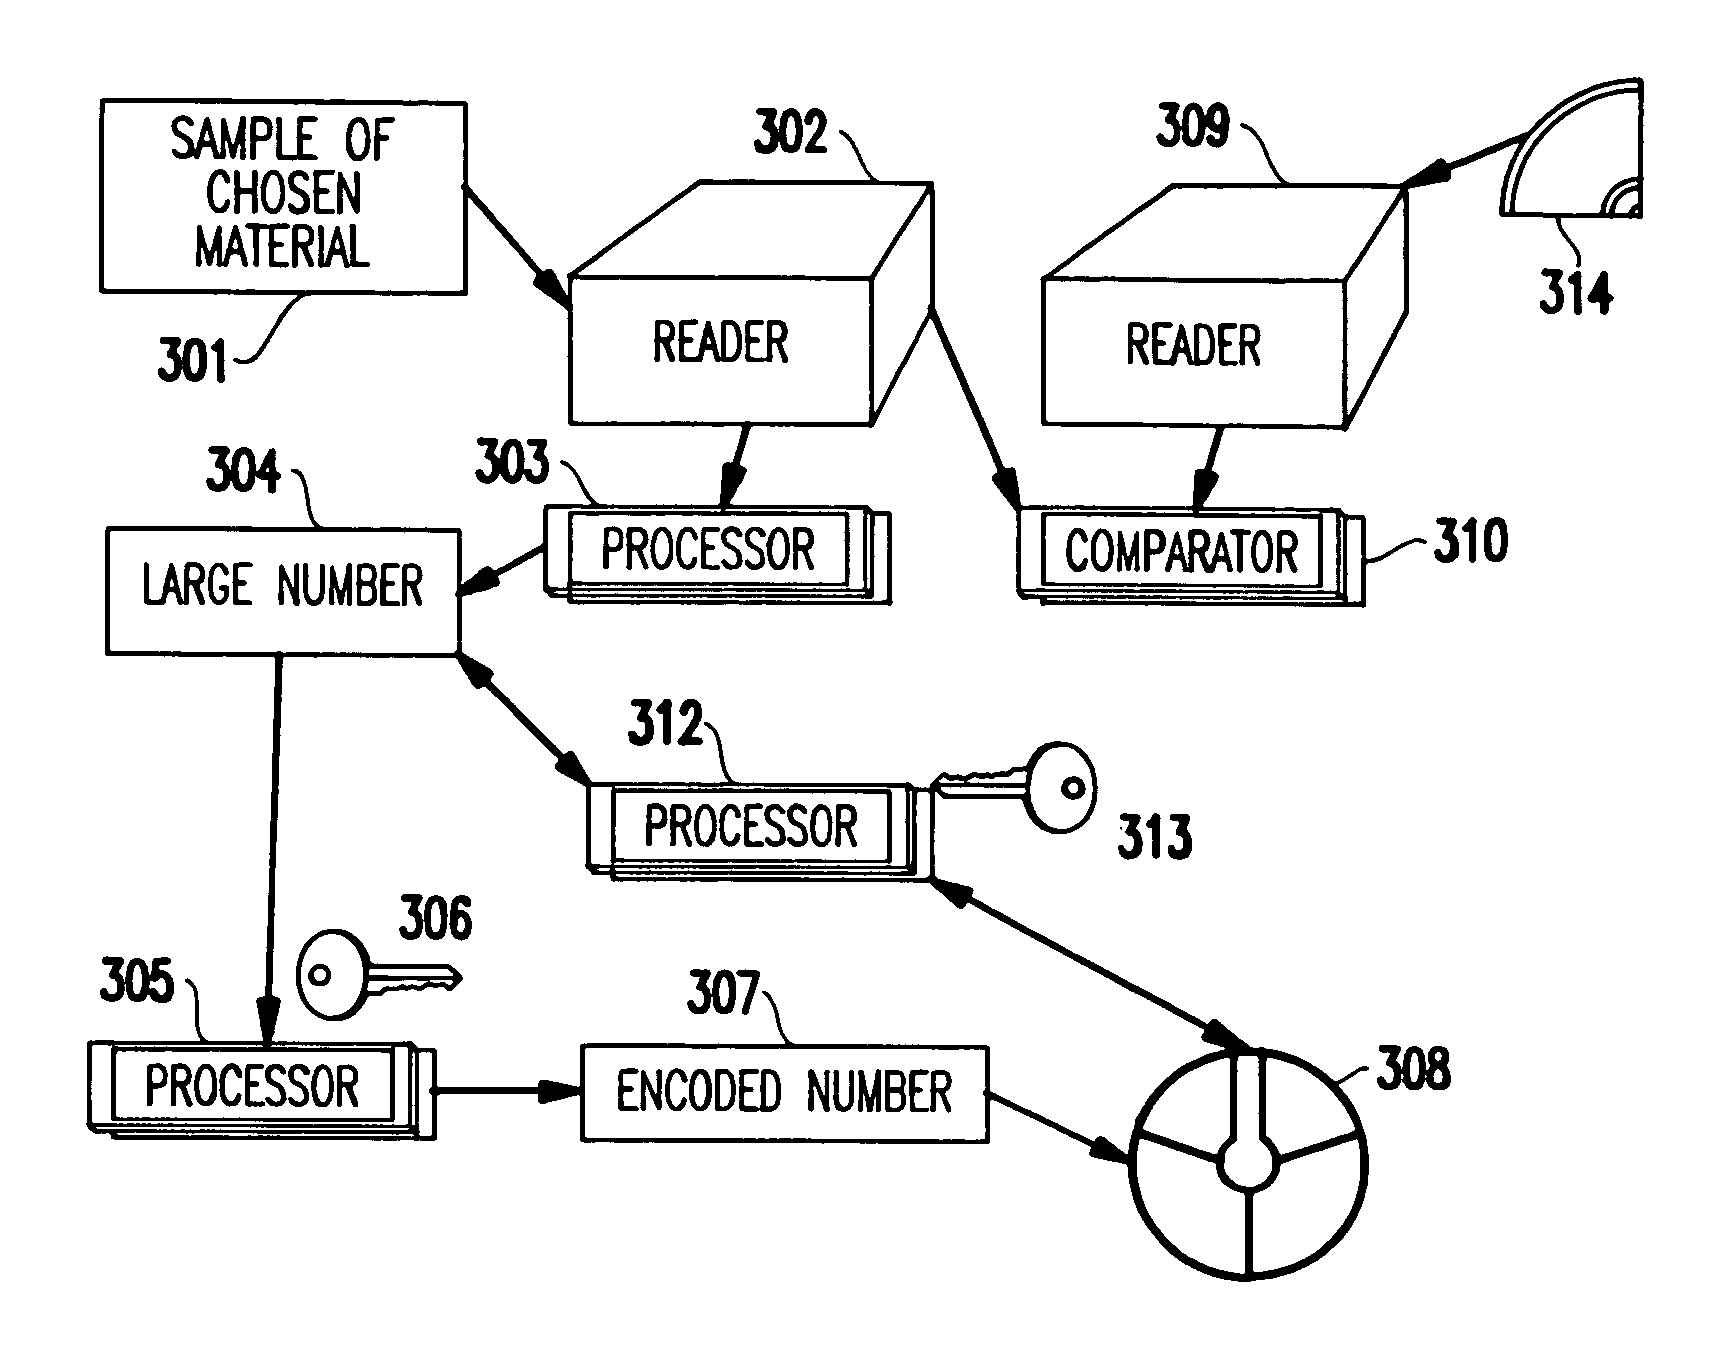 Method and apparatus for producing duplication- and imitation-resistant identifying marks on objects, and duplication- and duplication- and imitation-resistant objects